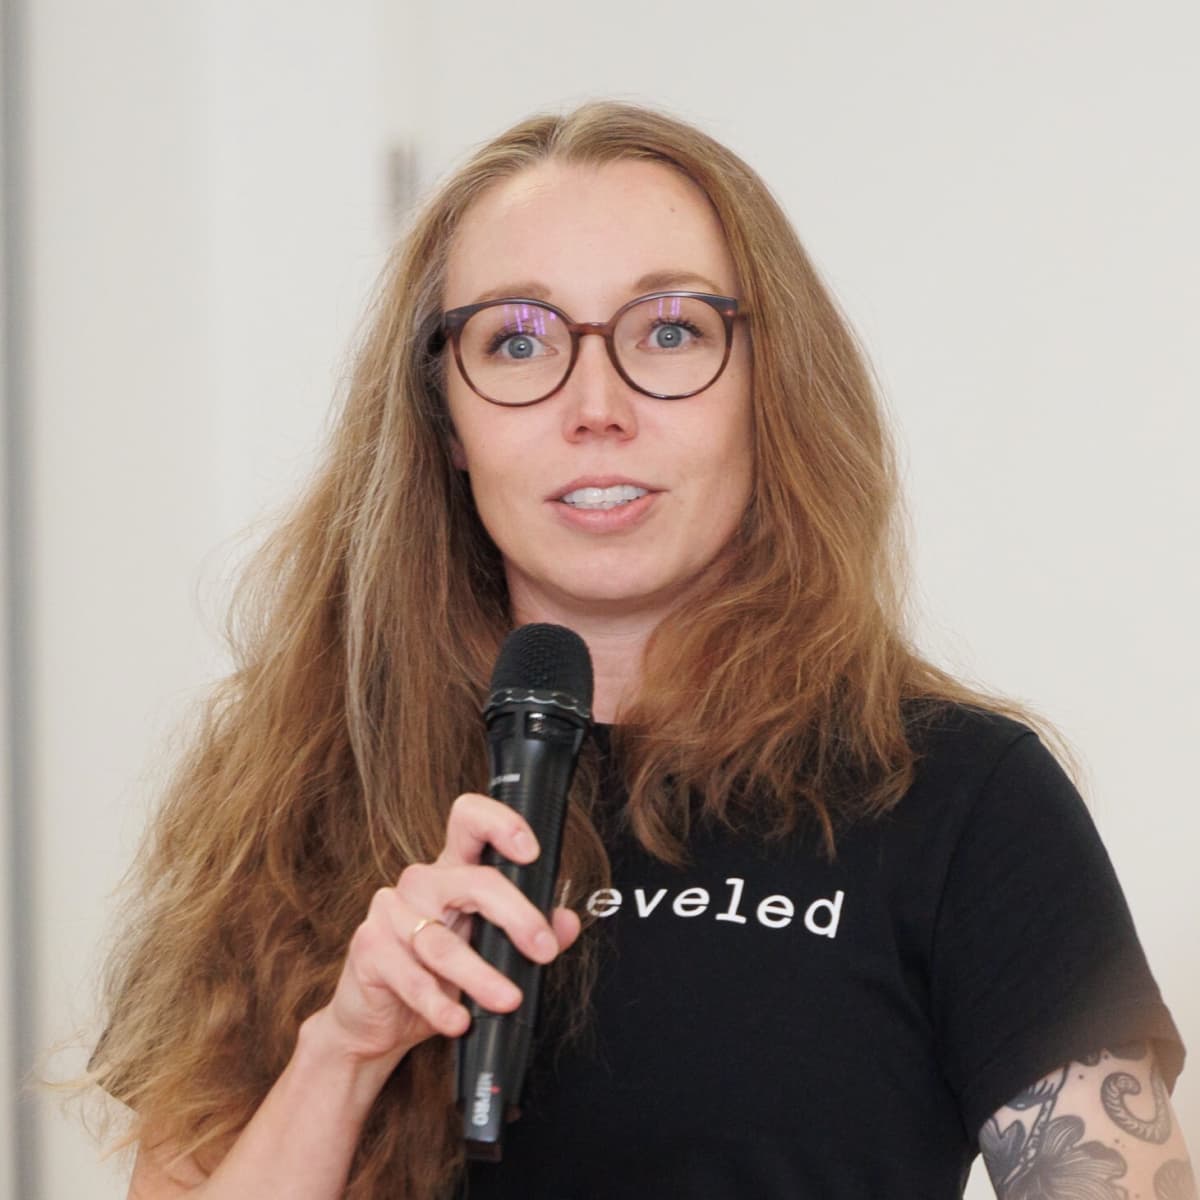 White woman with long hair, wearing glasses and a black shirt talks into a microphone